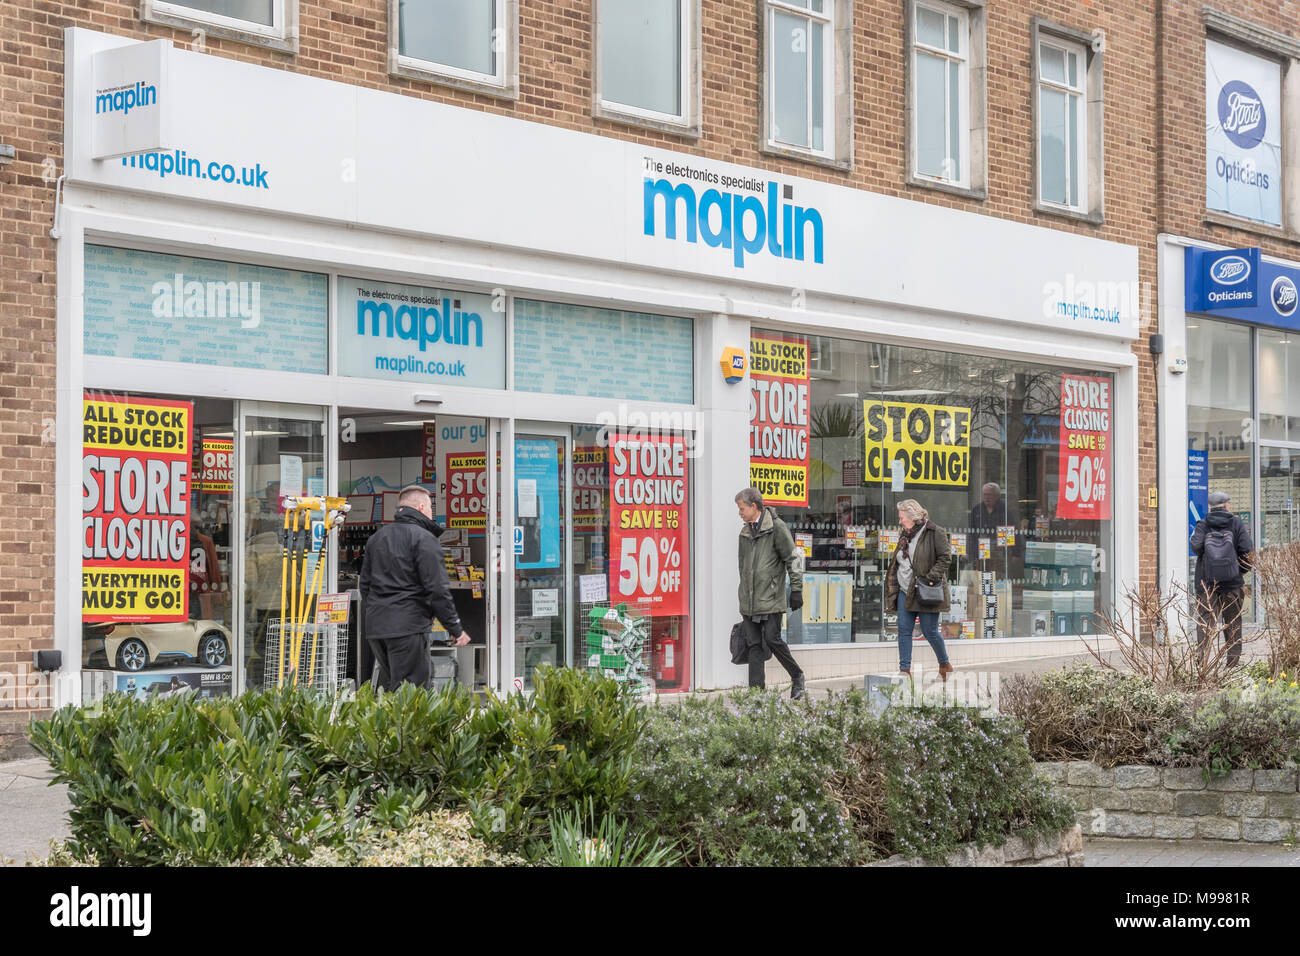 Maplin Plymouth after announcing all stores closing. Metaphor - struggling retailers, high street crisis, company administration, death of high street Stock Photo